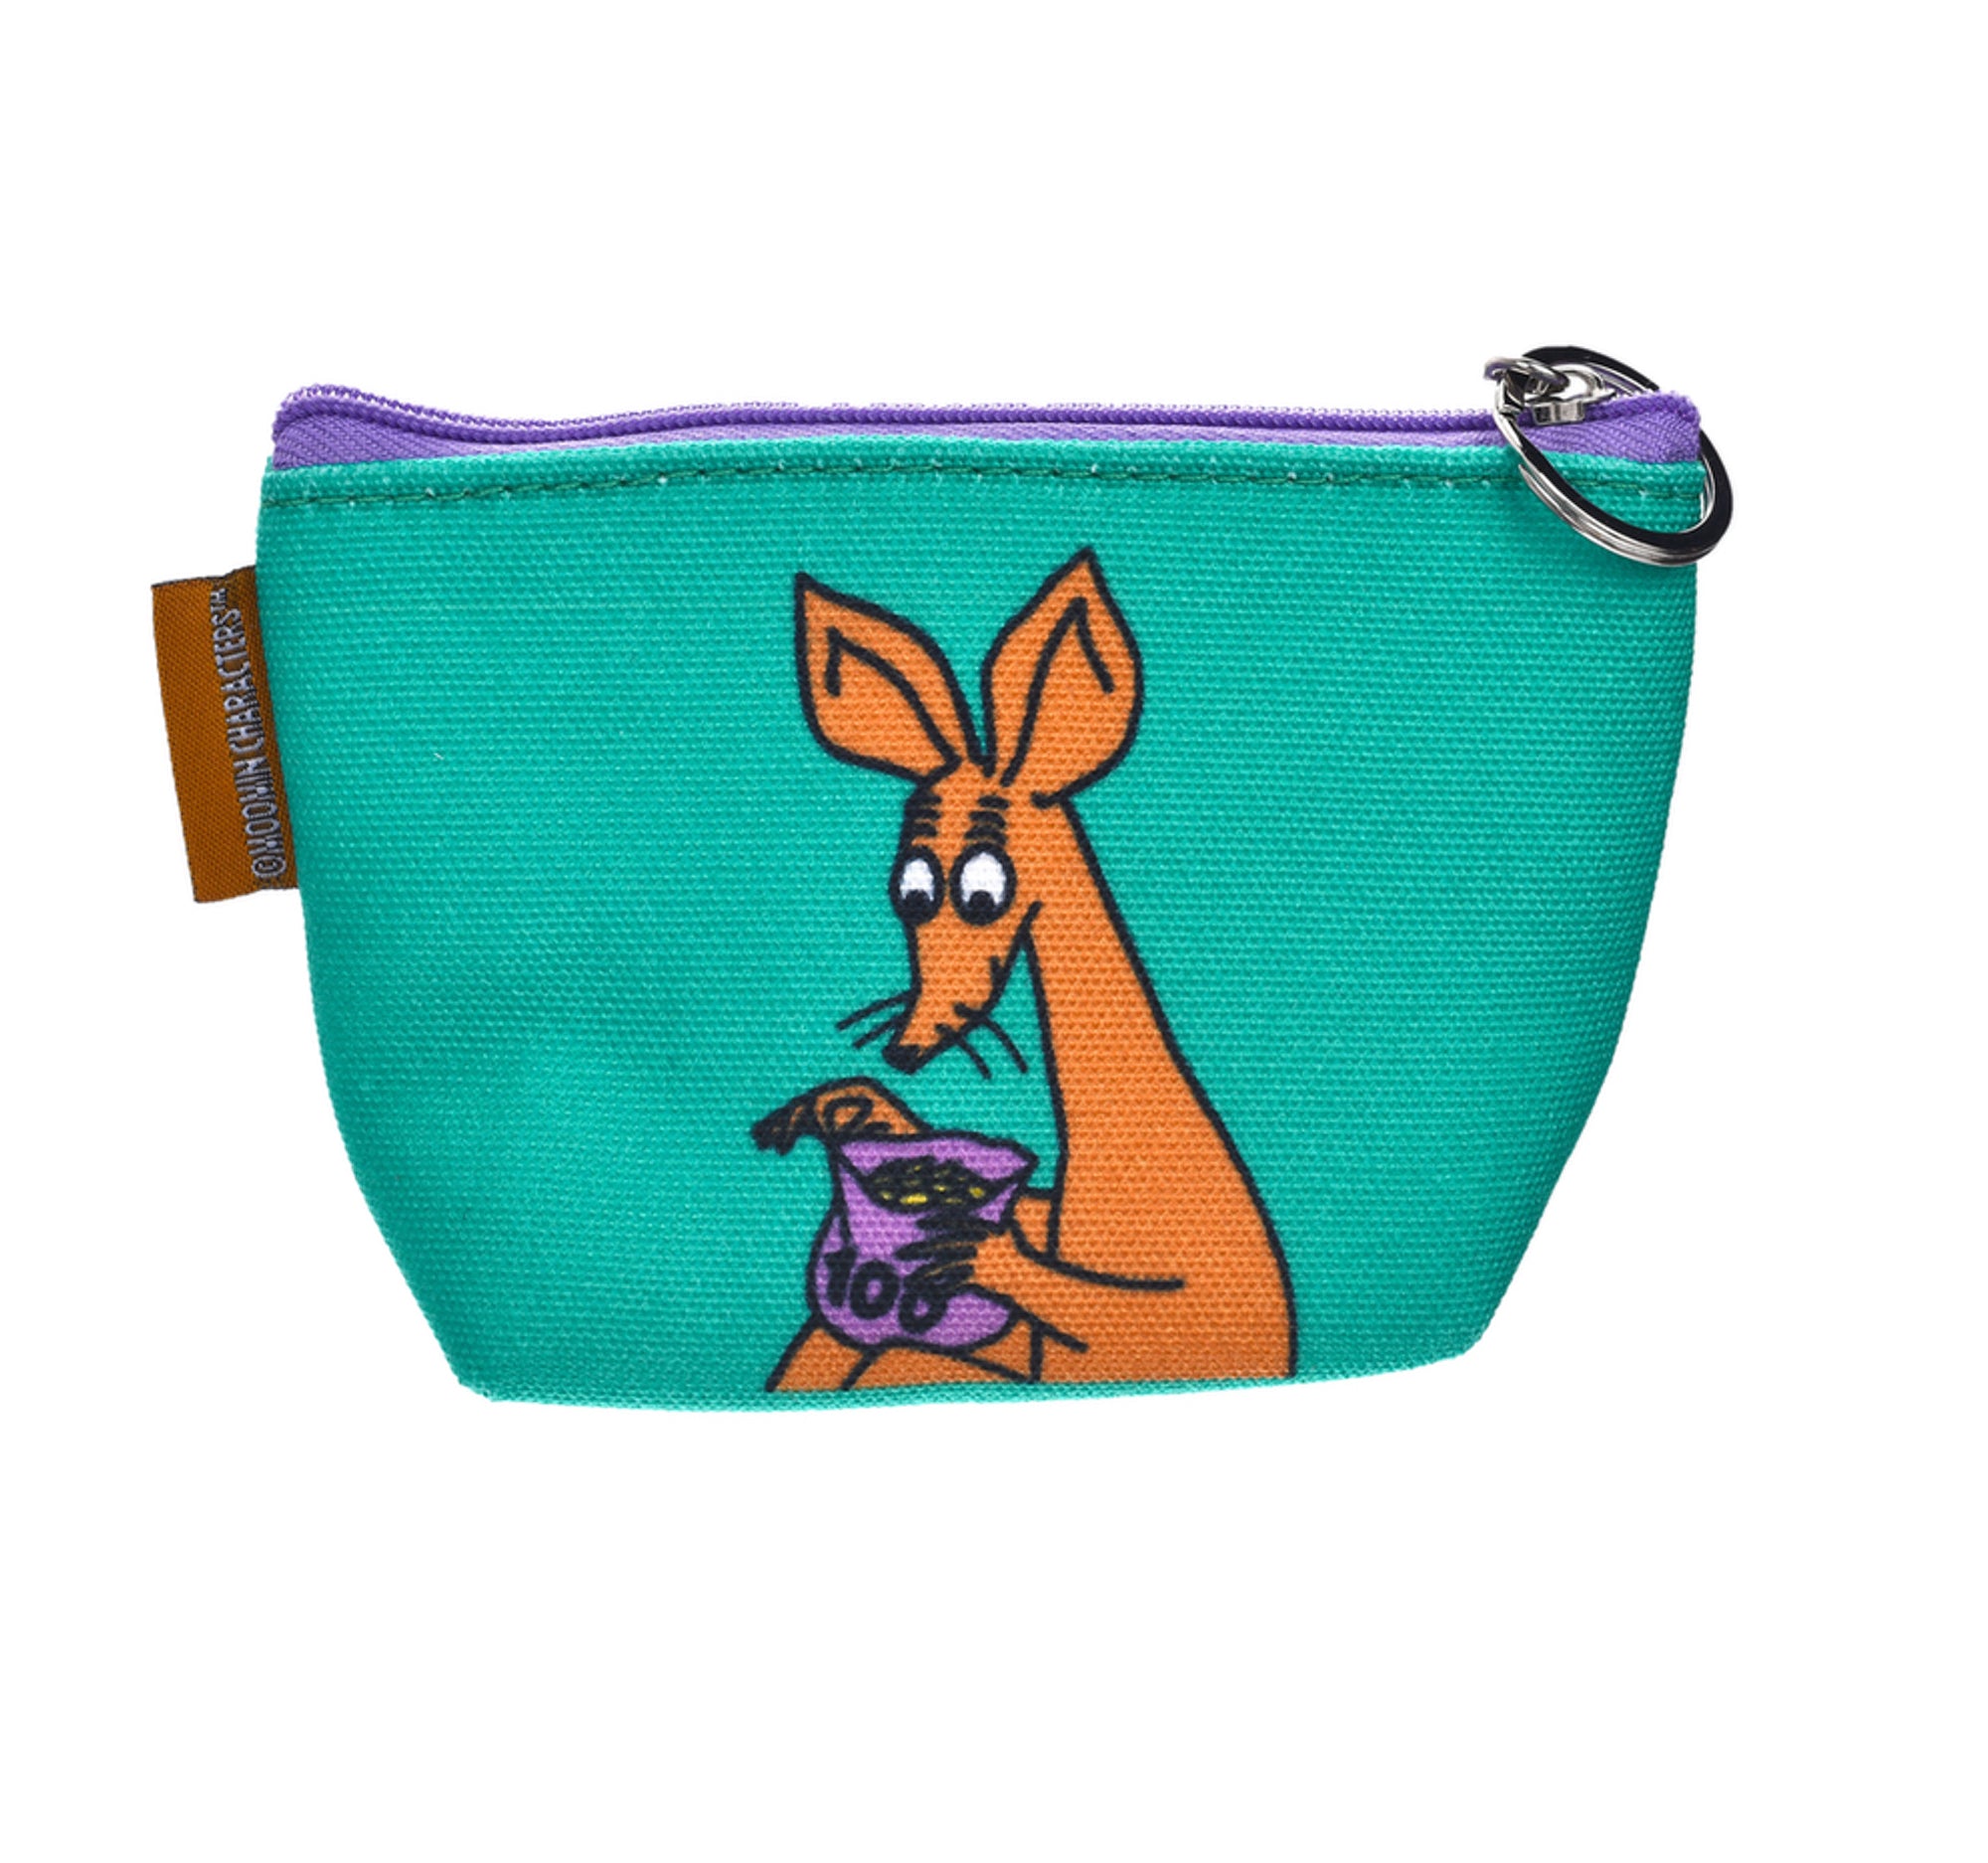 Sniff Coin Purse - Green